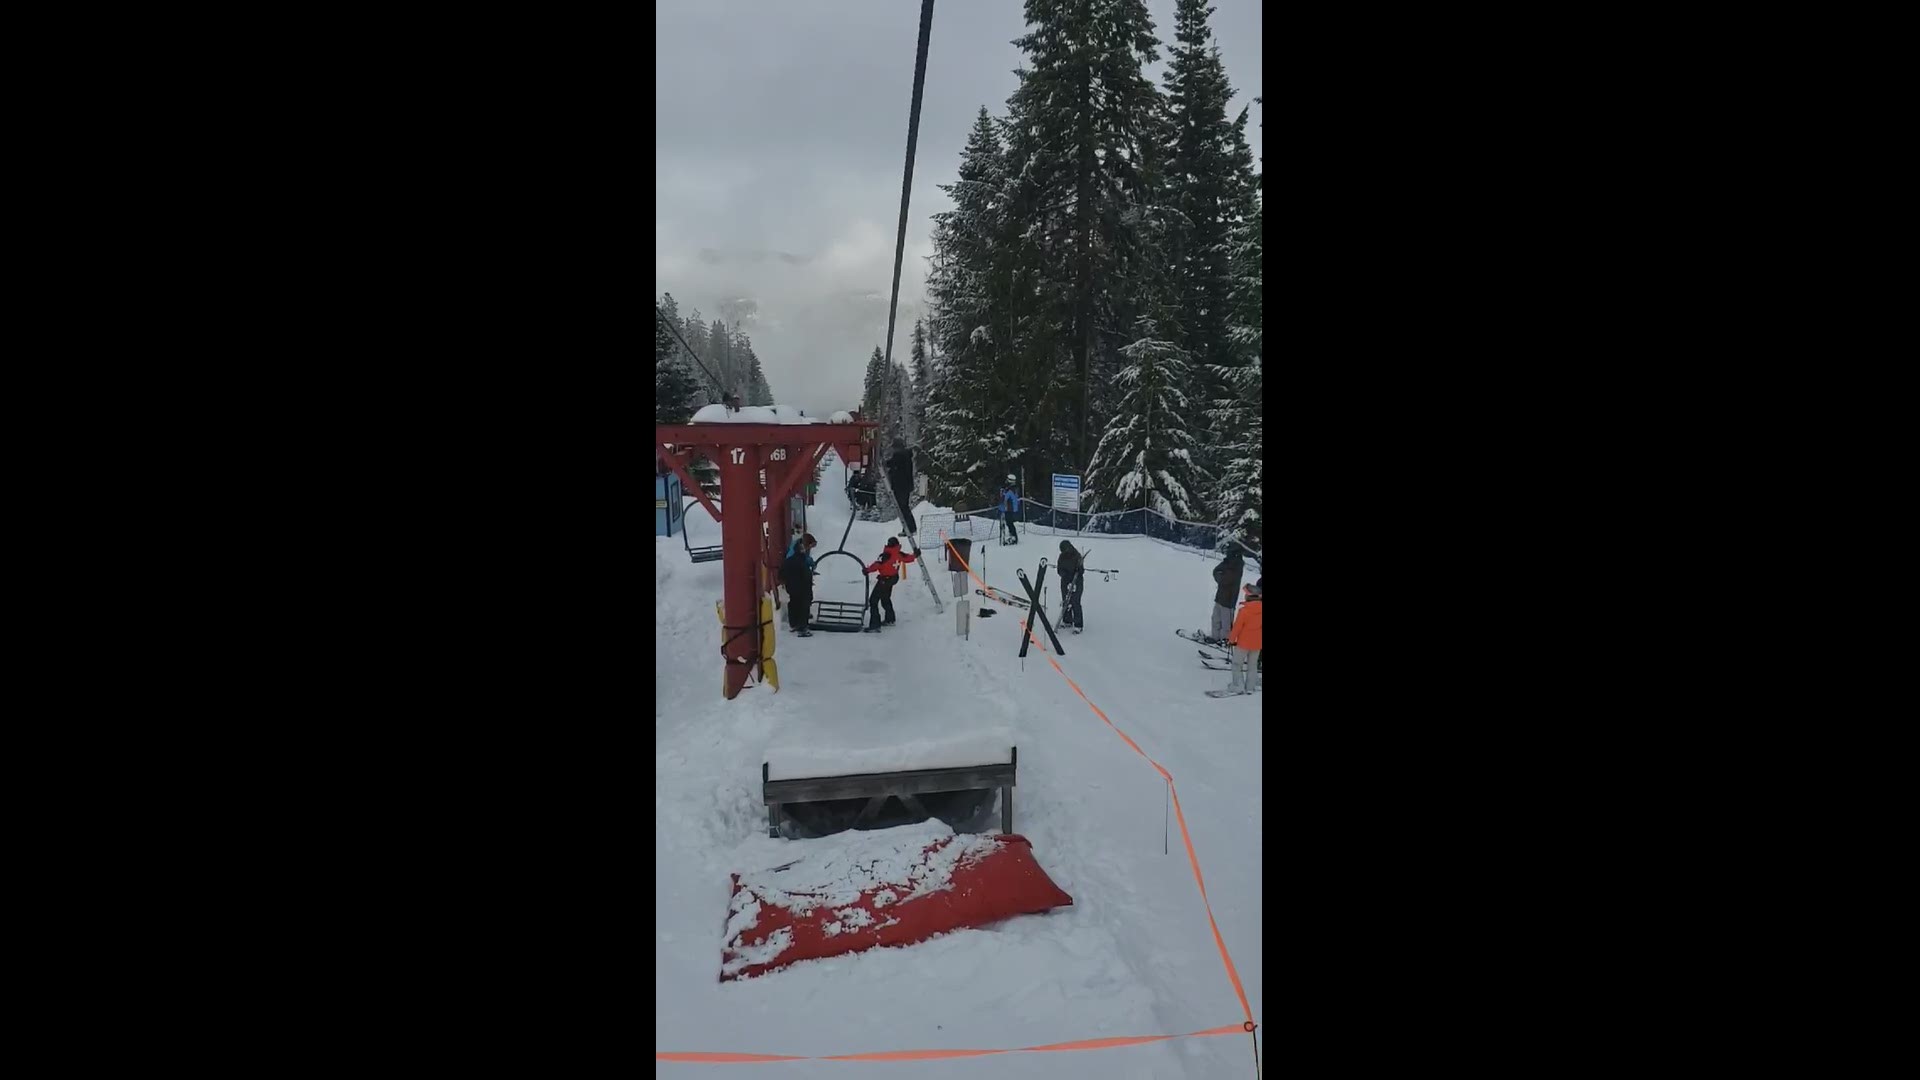 A chair fell from a lift at a Washington ski resort. Video from viewer Jamie Lunt